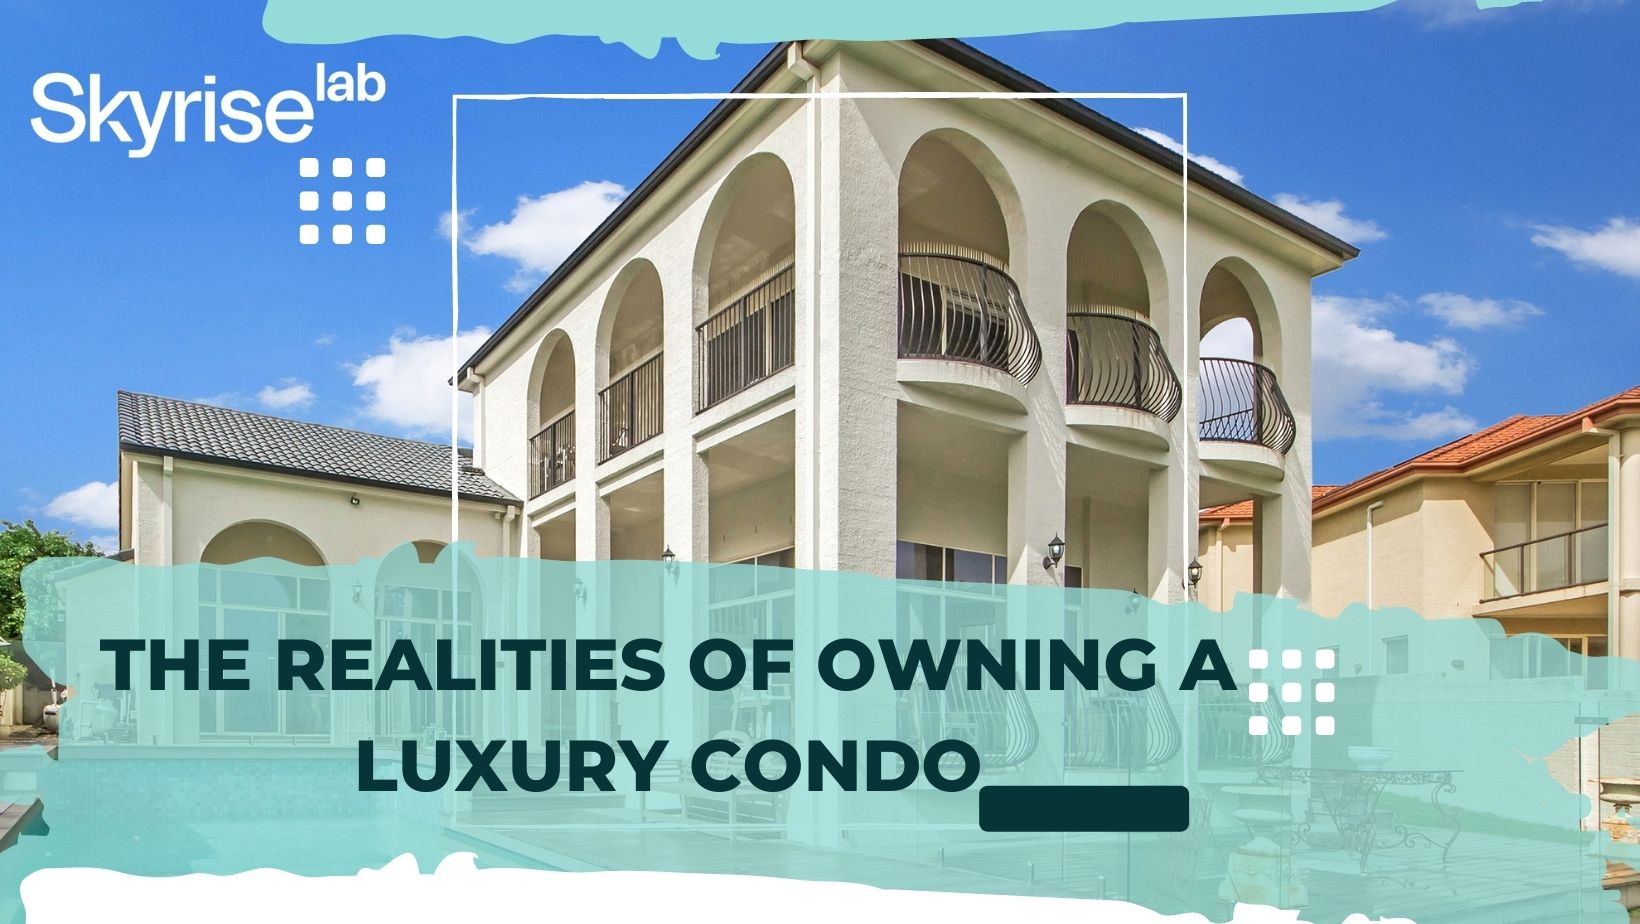 The Realities of Owning a Luxury Condo